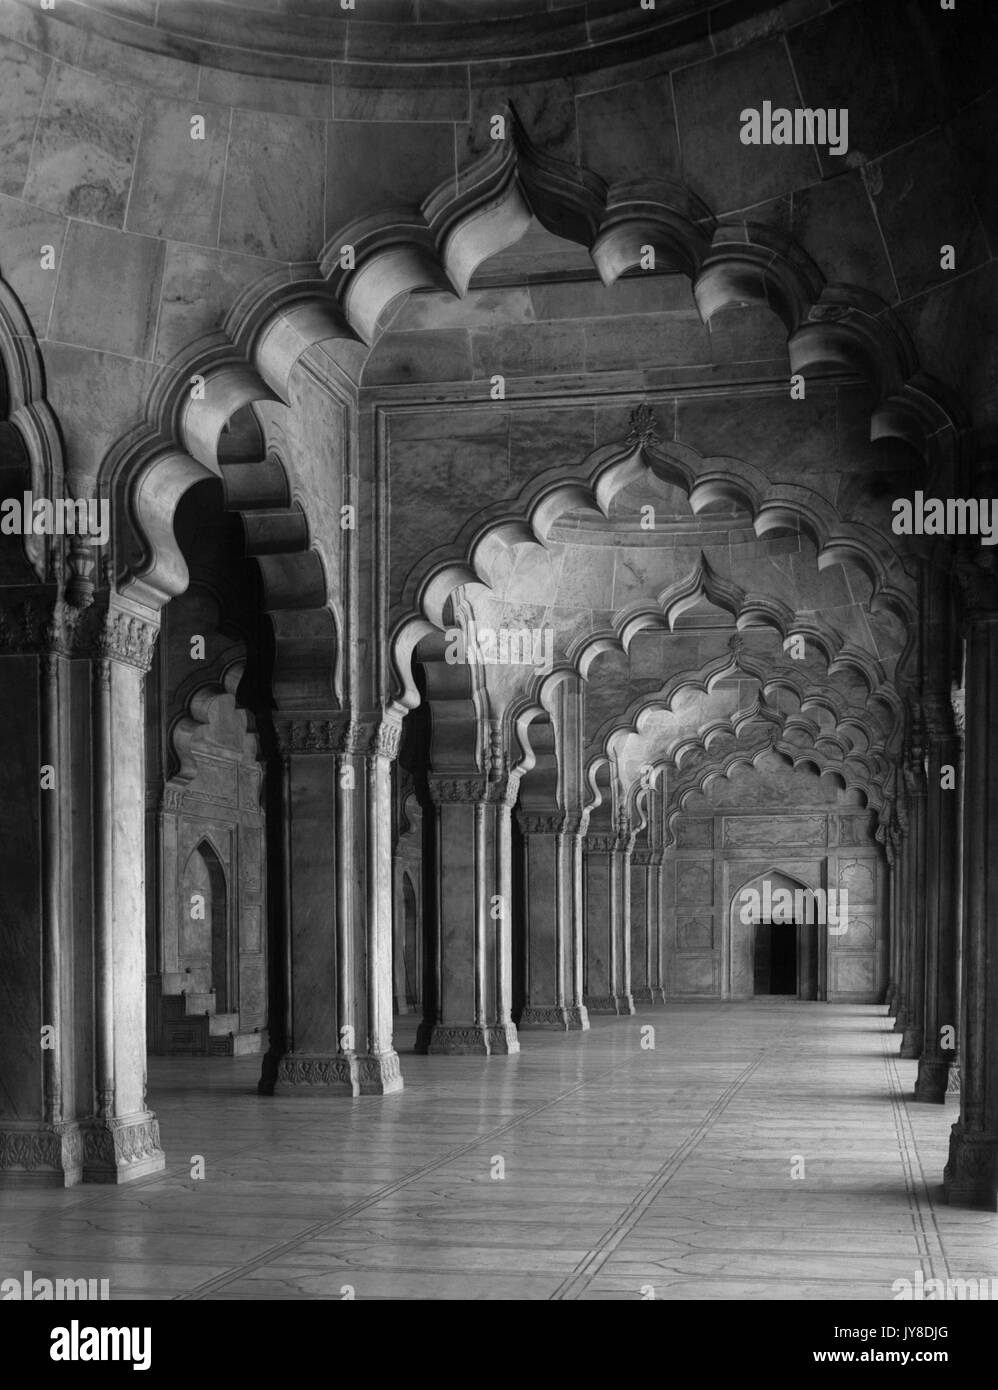 AJAXNETPHOTO. 2ND JANUARY, 1922. AGRA, INDIA. - MOTI MASJID INTERIOR IN AGRA FORT. PHOTO:T.J.SPOONER COLL/AJAX VINTAGE PICTURE LIBRARY REF; 19220201 1023  Stock Photo